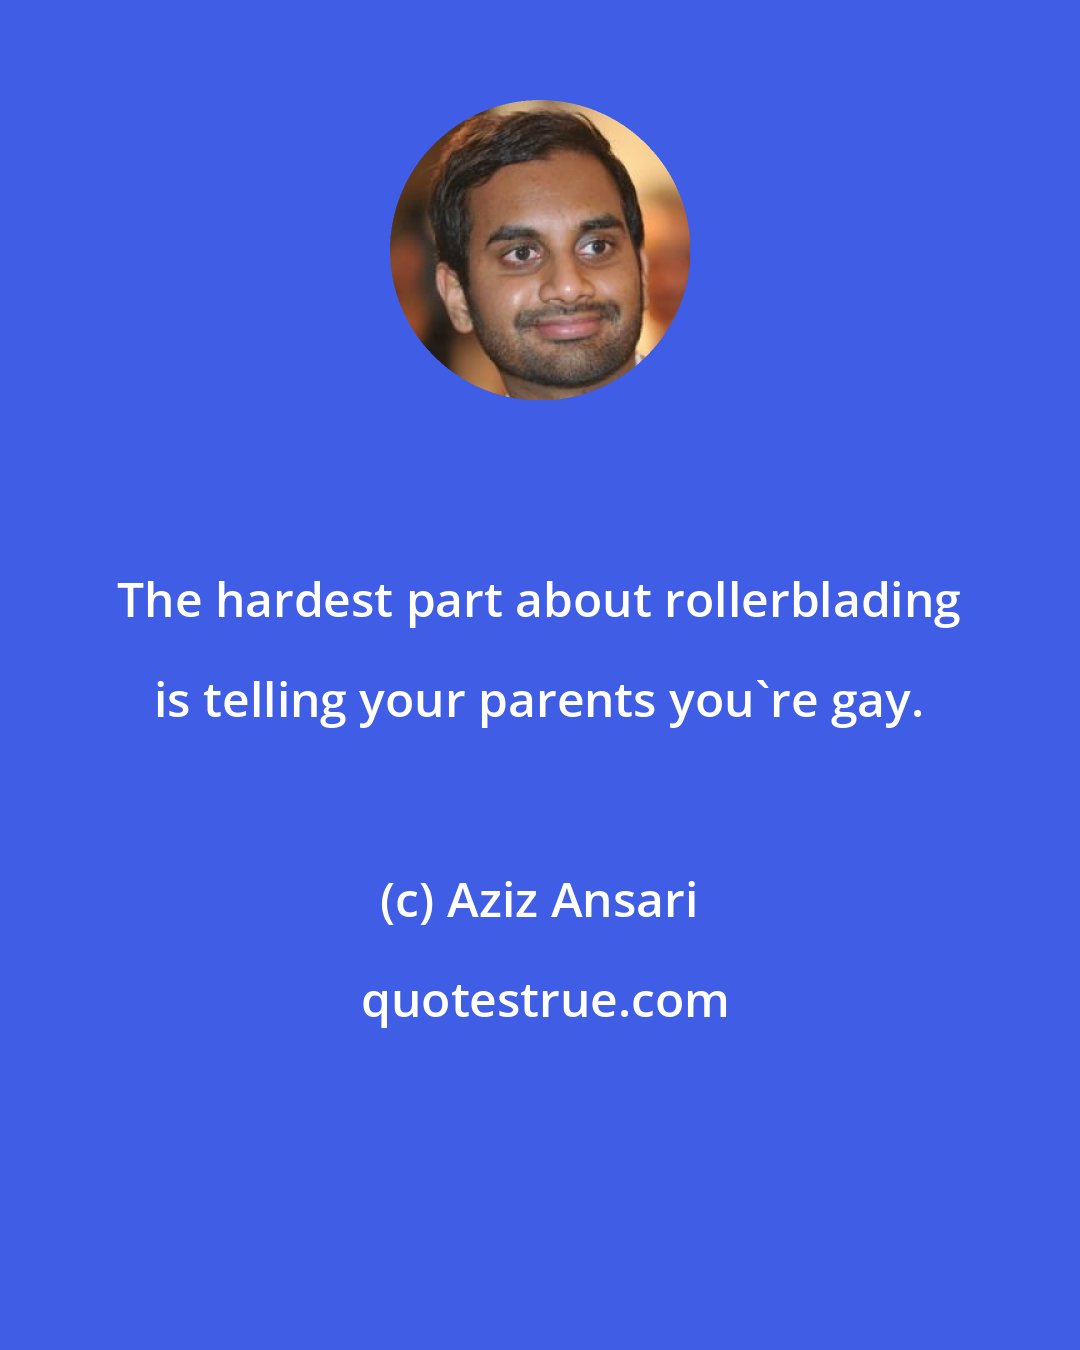 Aziz Ansari: The hardest part about rollerblading is telling your parents you're gay.